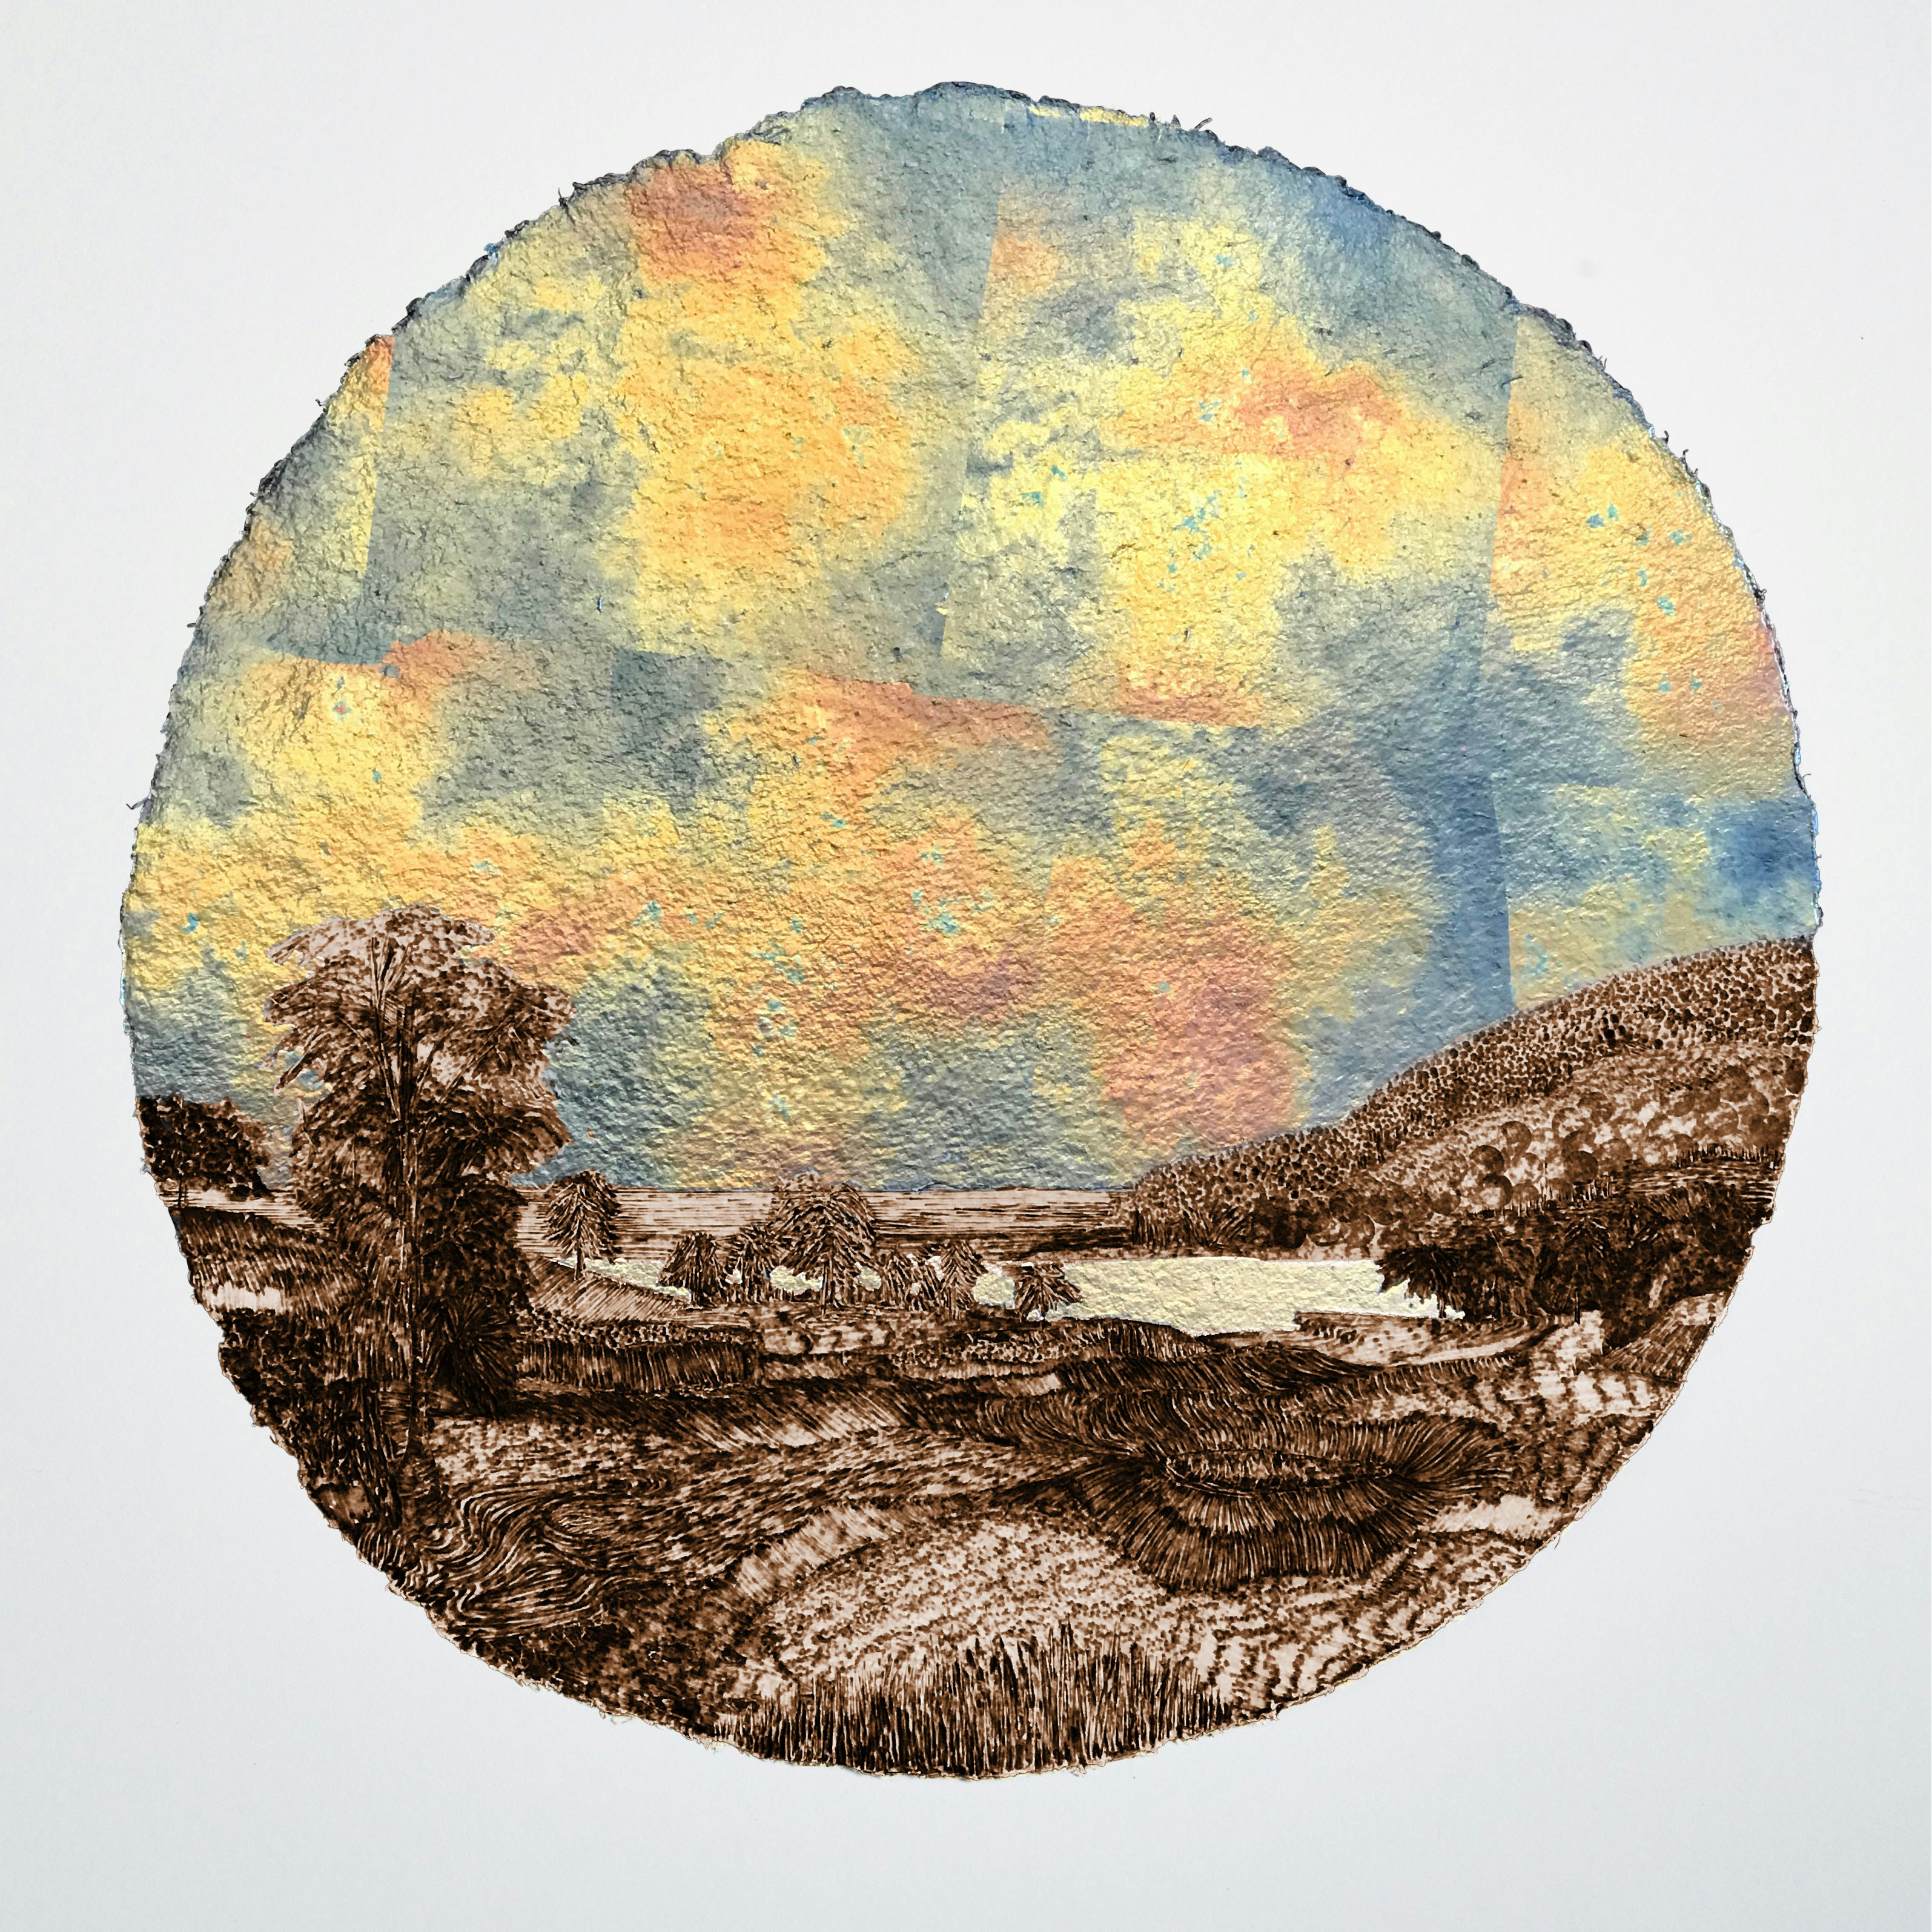 Stacy Lynn Waddell, <em>Landscape with Rainbow After a Celestial Explosion (for R. S.D.)</em>, 1859/2021. Burned handmade paper with blue pencil, variegated metal and composition gold leaf, 16 inches diameter. Courtesy the artist and CANDICE MADEY, New York. Photo: Christopher Ciccone Photography.